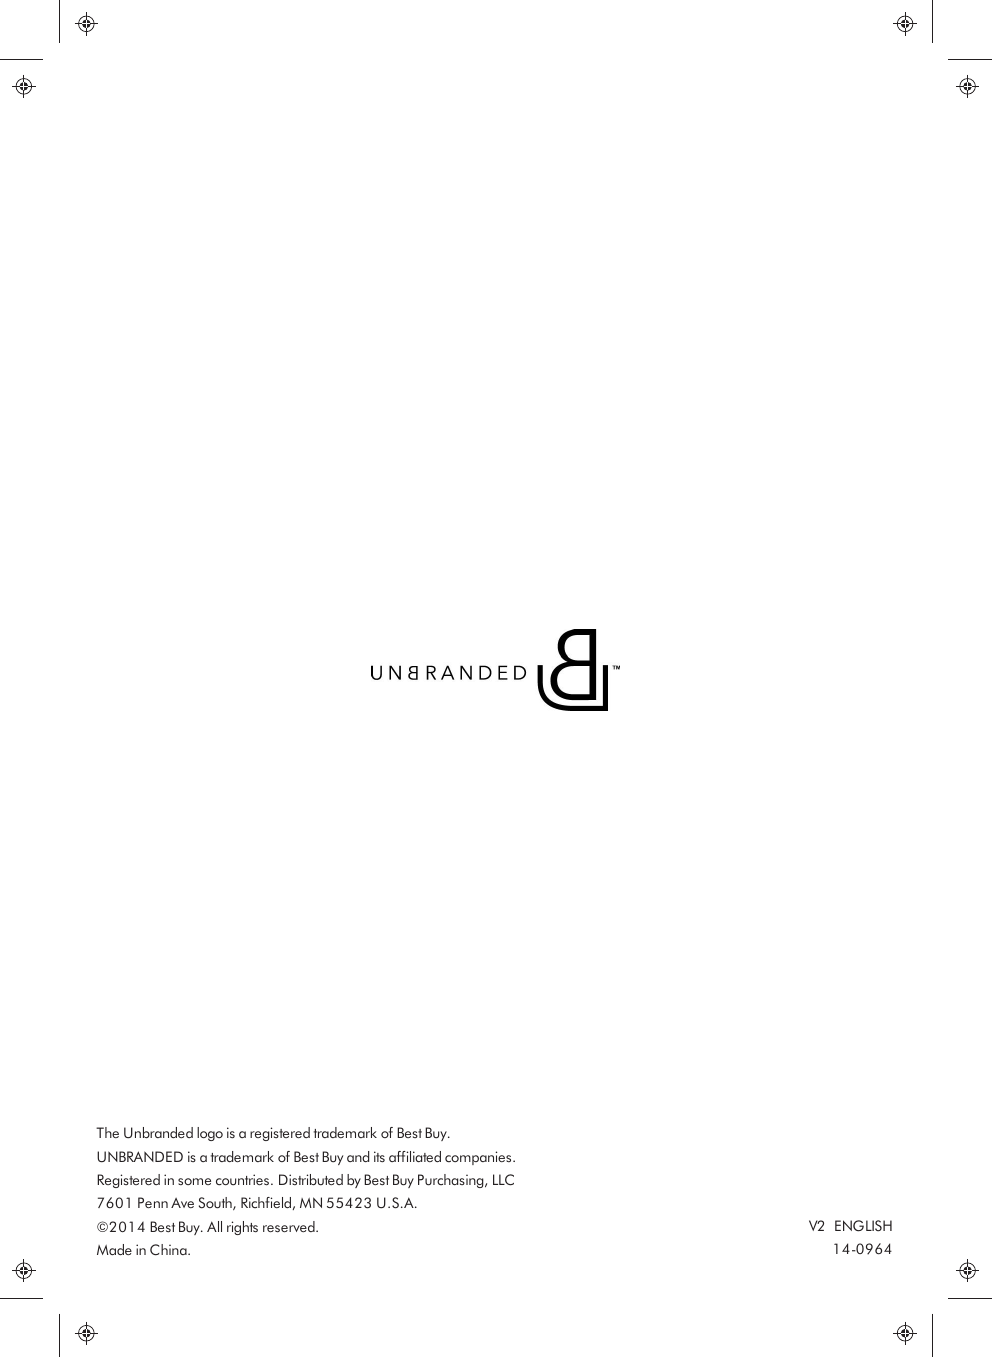 The Unbranded logo is a registered trademark of Best Buy.UNBRANDED is a trademark of Best Buy and its affiliated companies.Registered in some countries. Distributed by Best Buy Purchasing, LLC7601 Penn Ave South, Richfield, MN 55423 U.S.A.©2014 Best Buy. All rights reserved.Made in China.V2xENGLISH14-0964